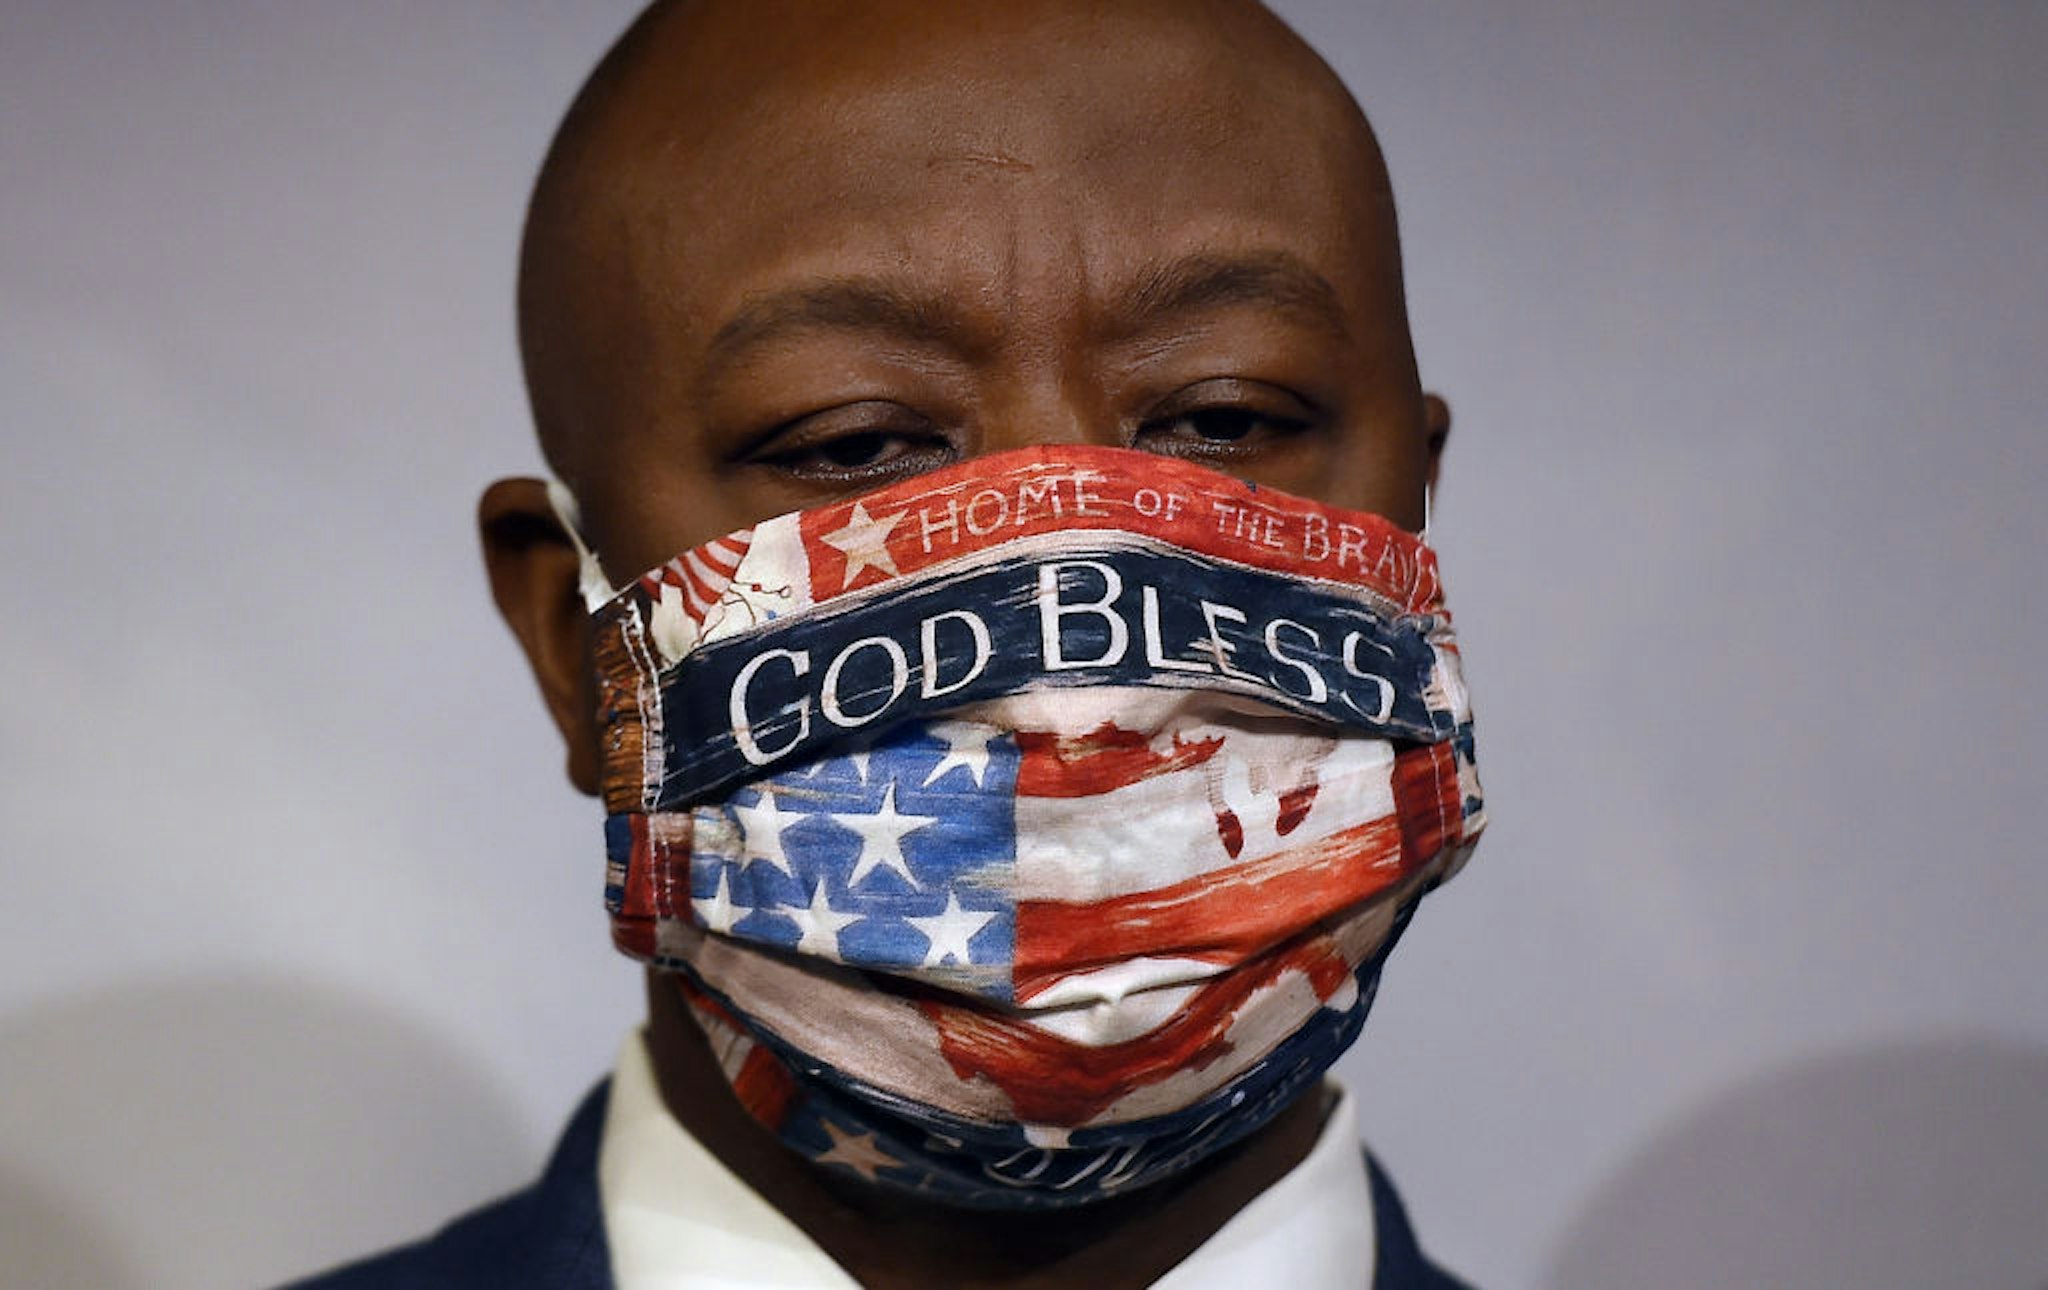 Sen. Tim Scott (R-SC) participates in a news conference to announce that the Senate will consider police reform legislation, at the US Capitol on June 17, 2020 in Washington, DC.